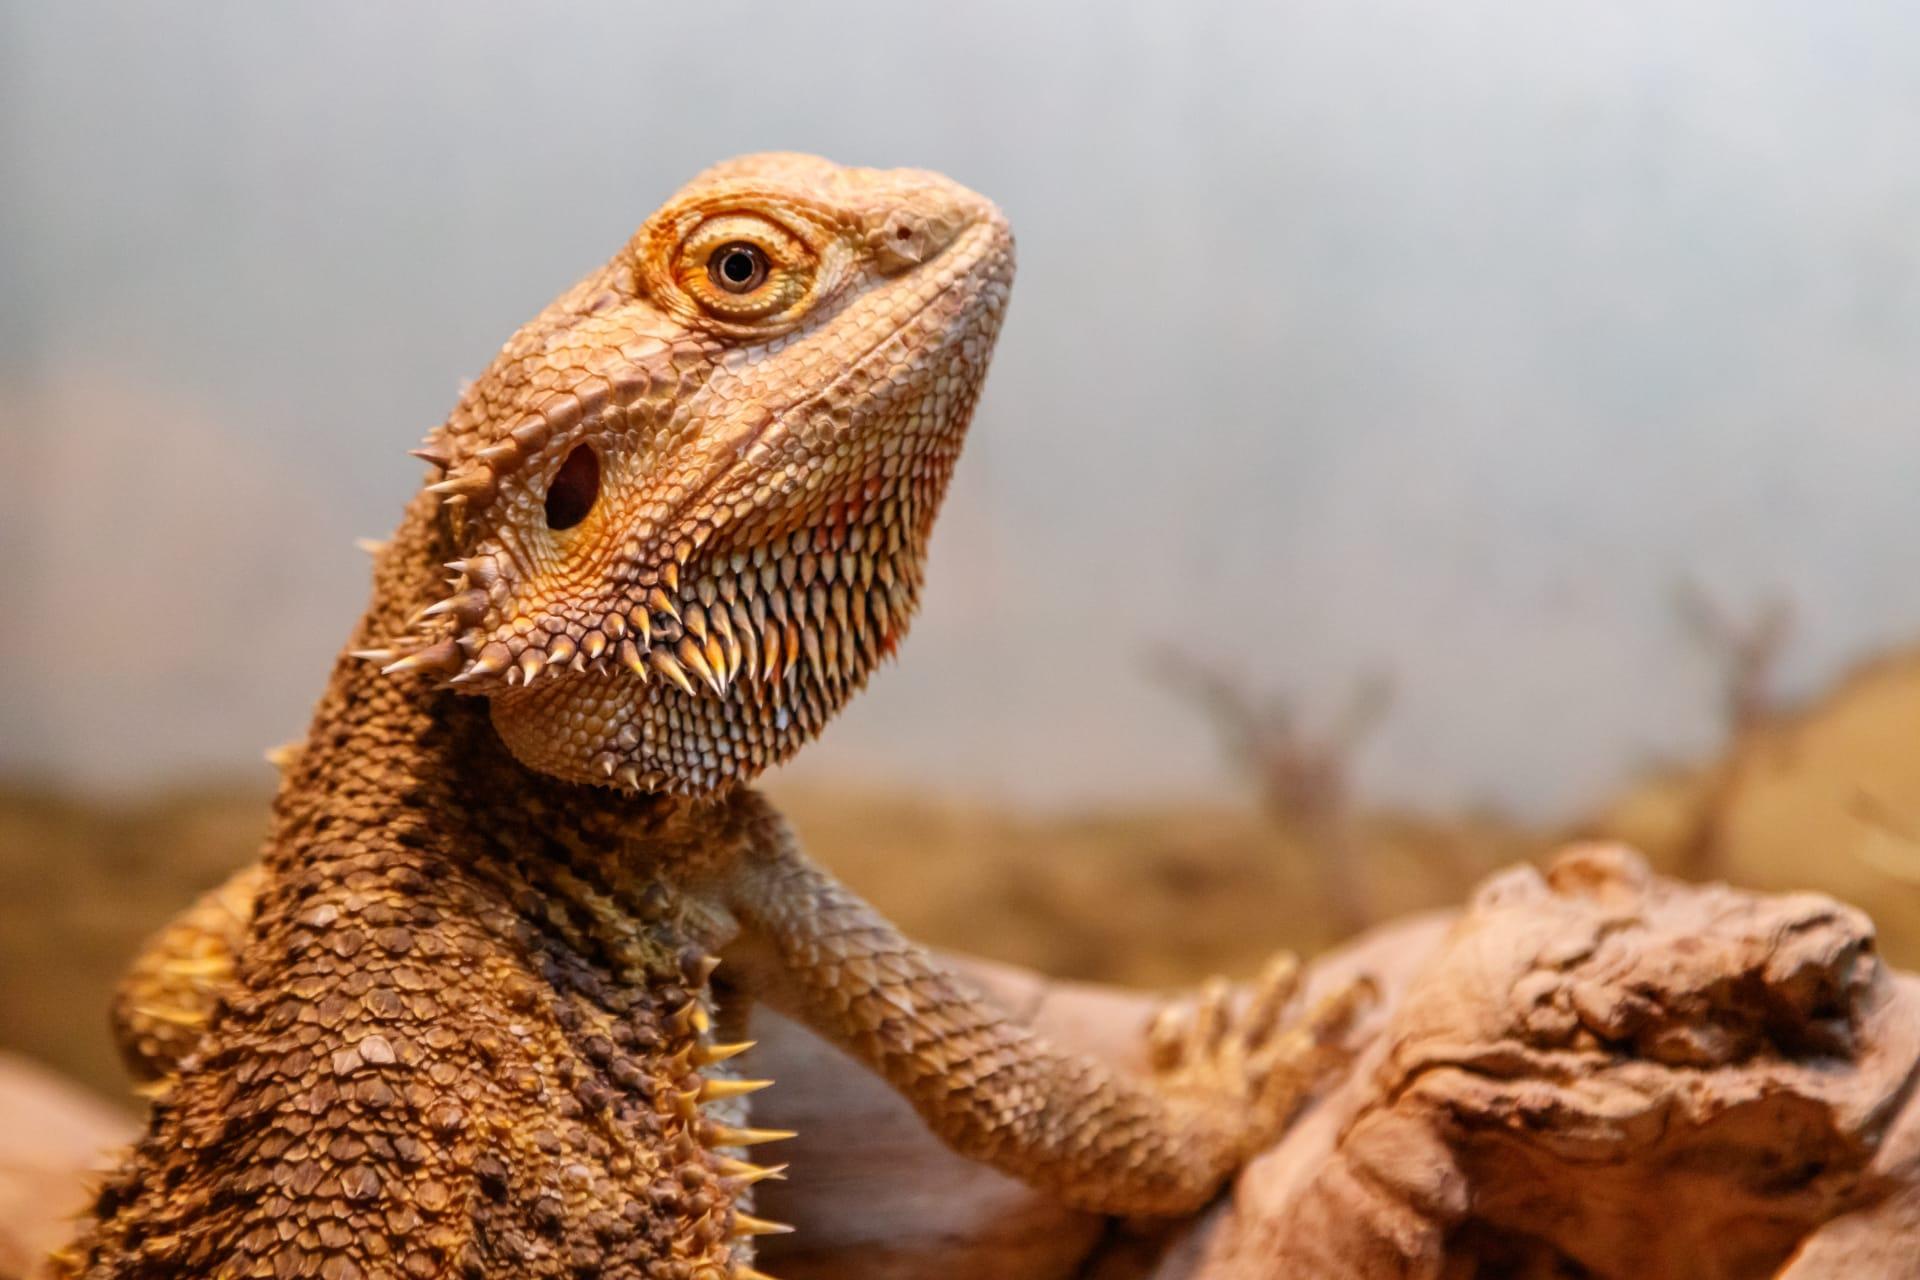 Bearded dragon pictures